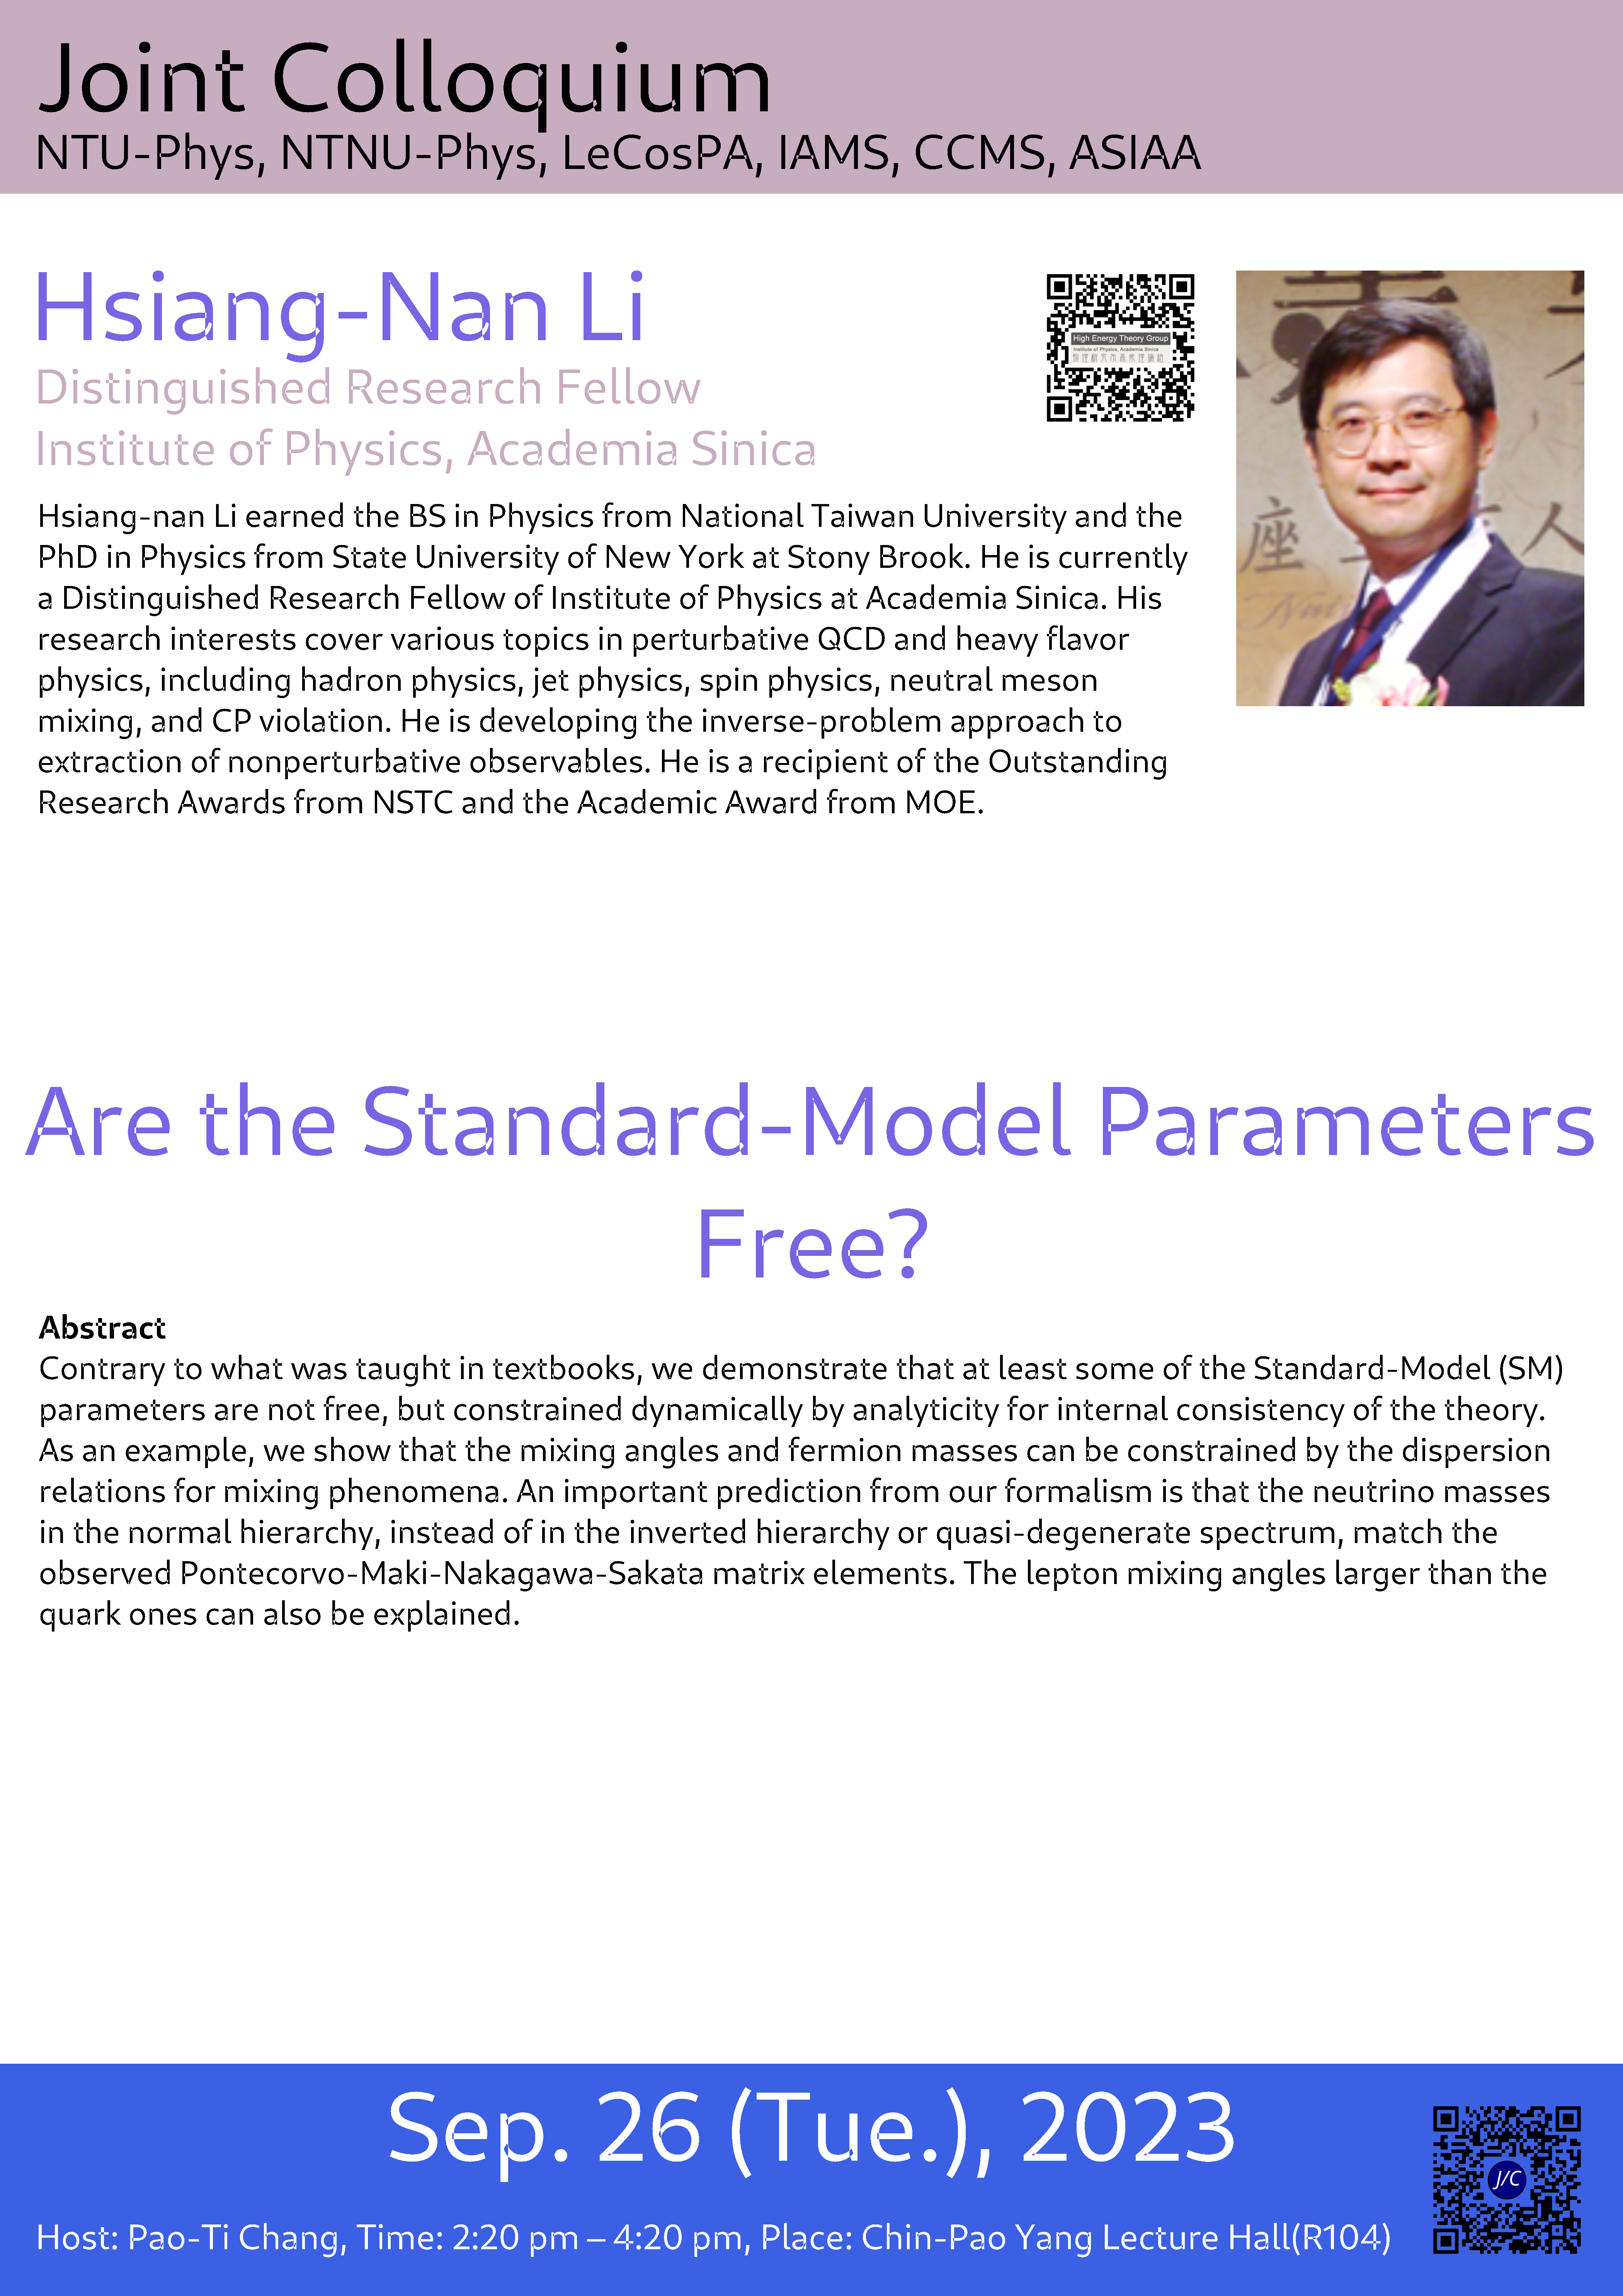 Are the Standard-Model Parameters Free?